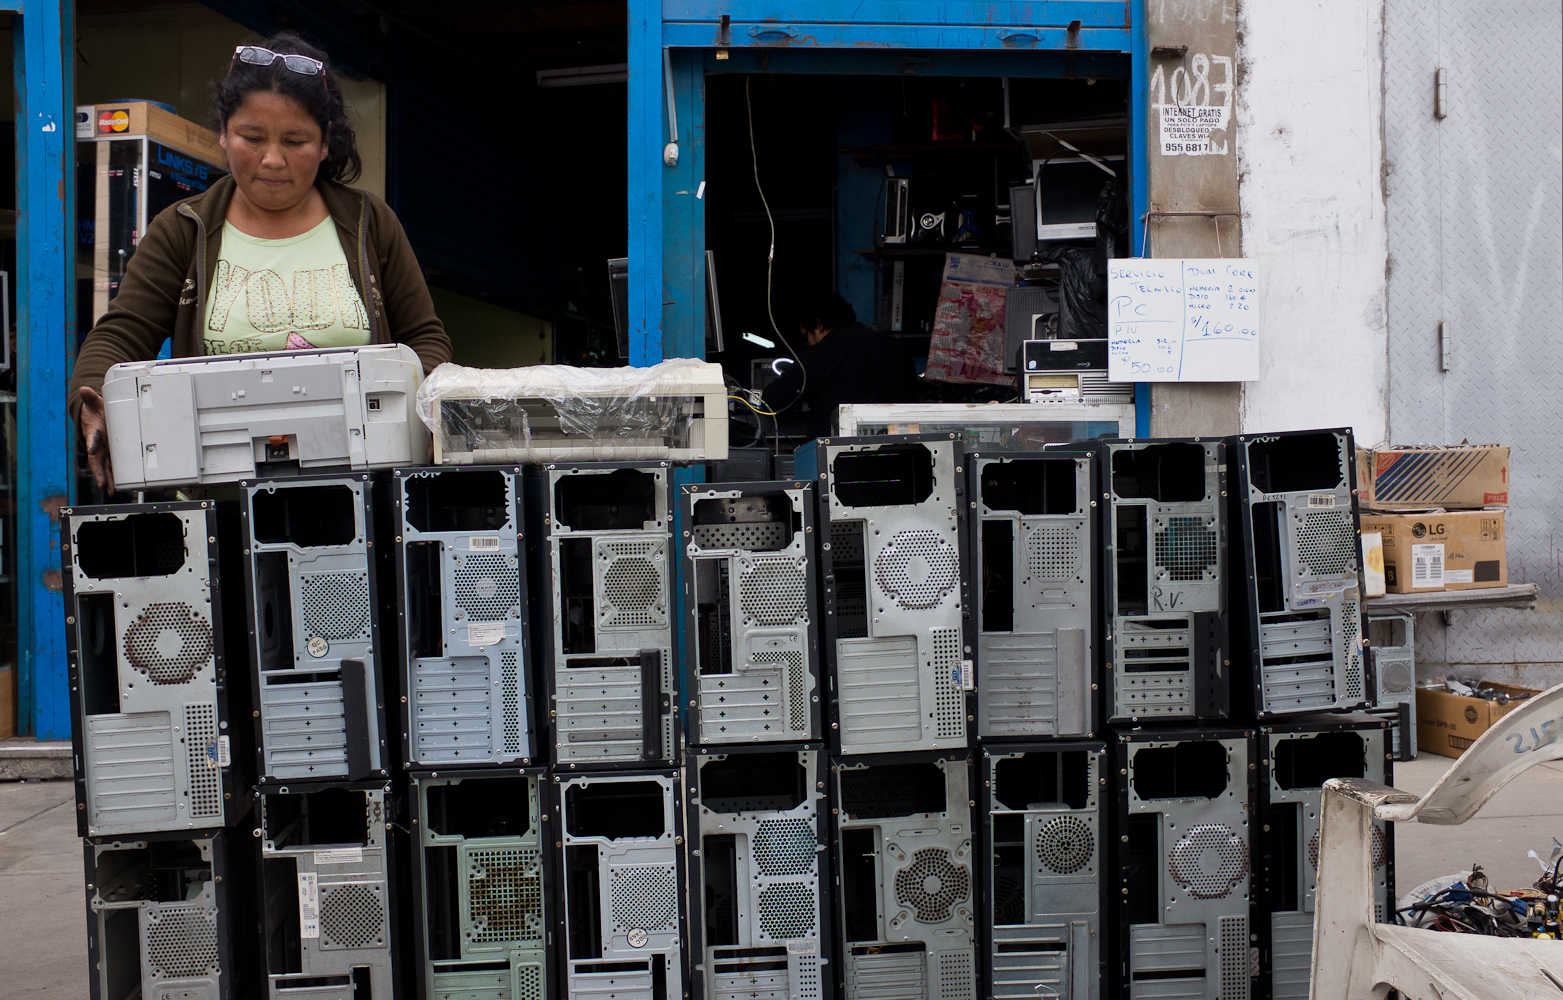 Senora Dona prepares PCs for sale on the sidewalk in front of the electronics repair shop, where she works. 